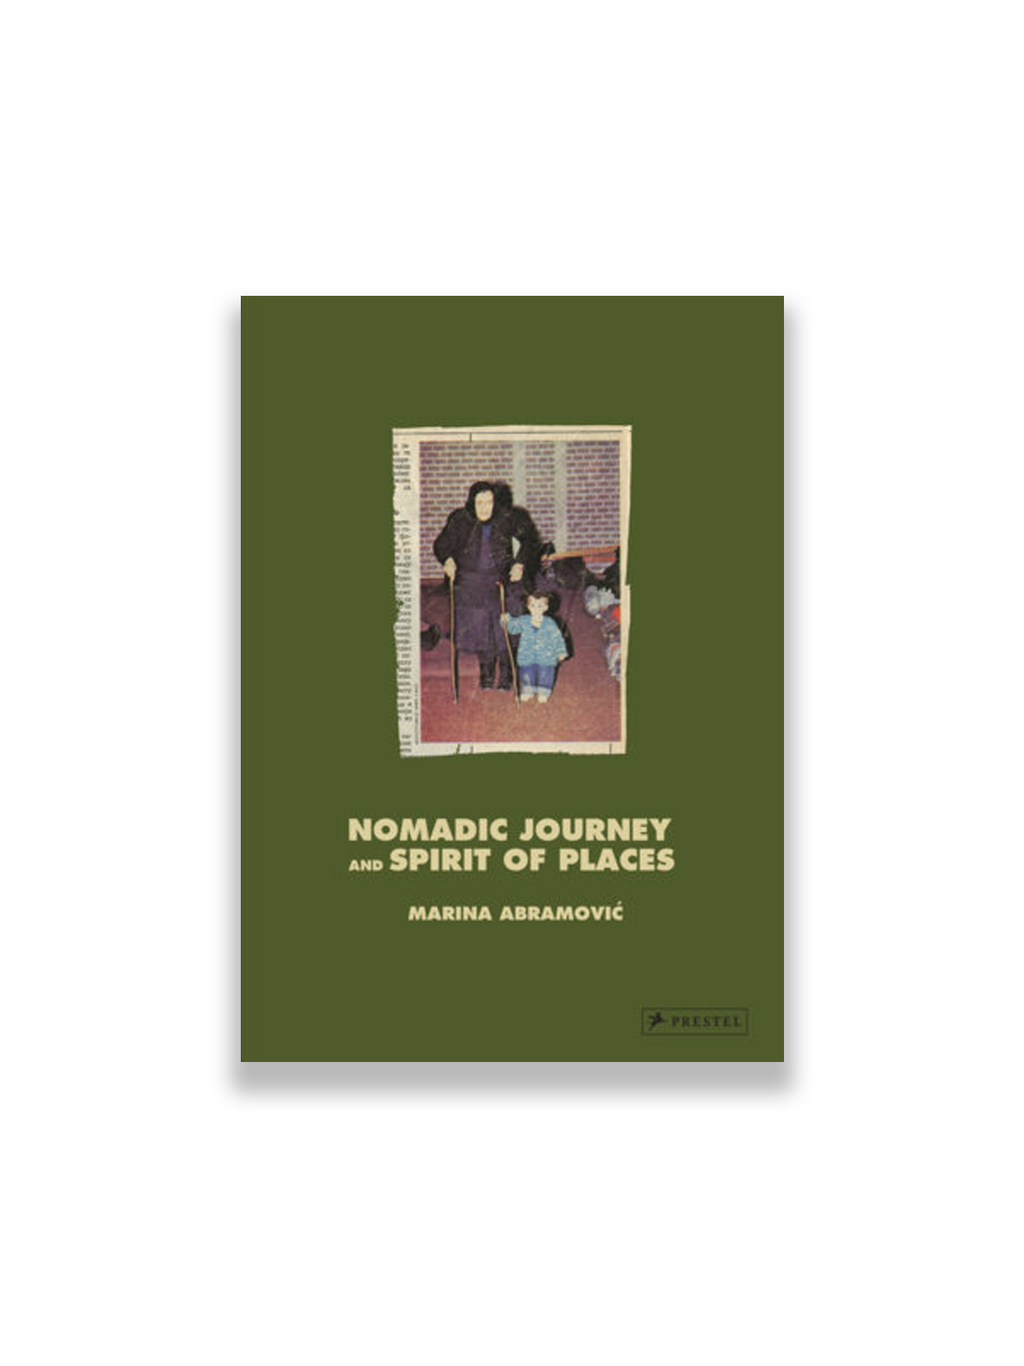 Nomadic Journey and Spirit of Places